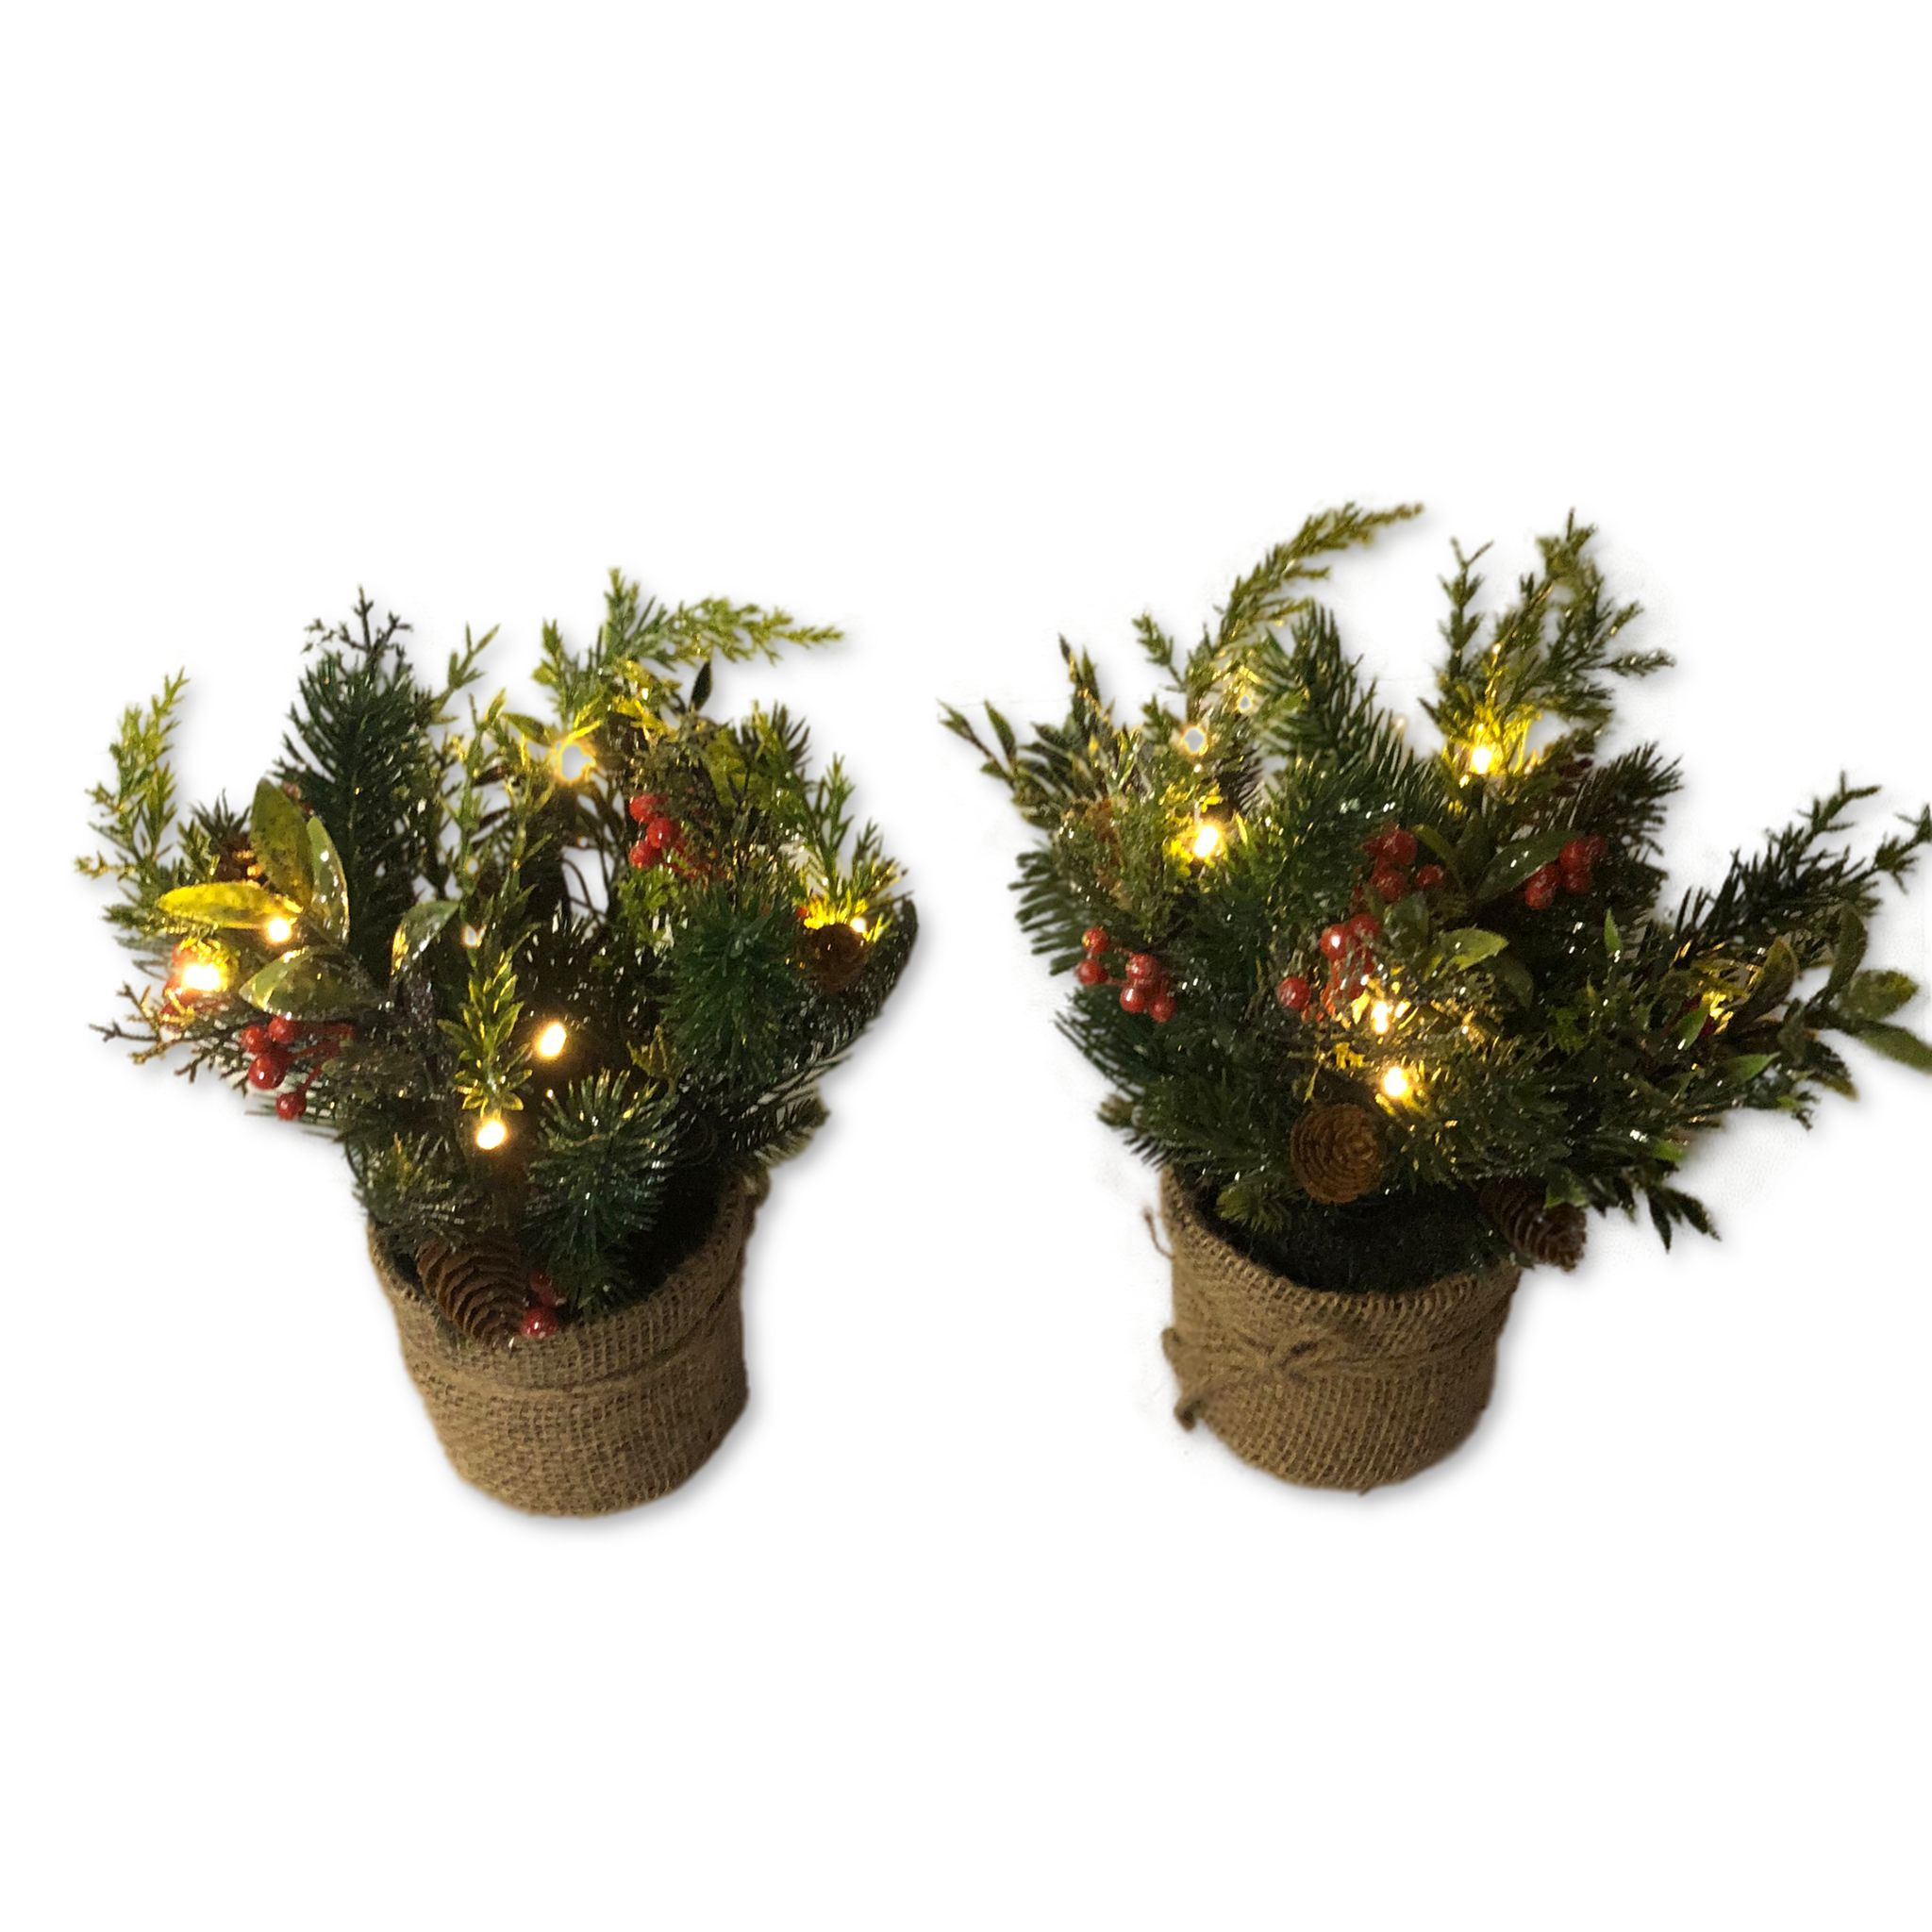 As is Set of 2 Mini Christmas Greens in Pots